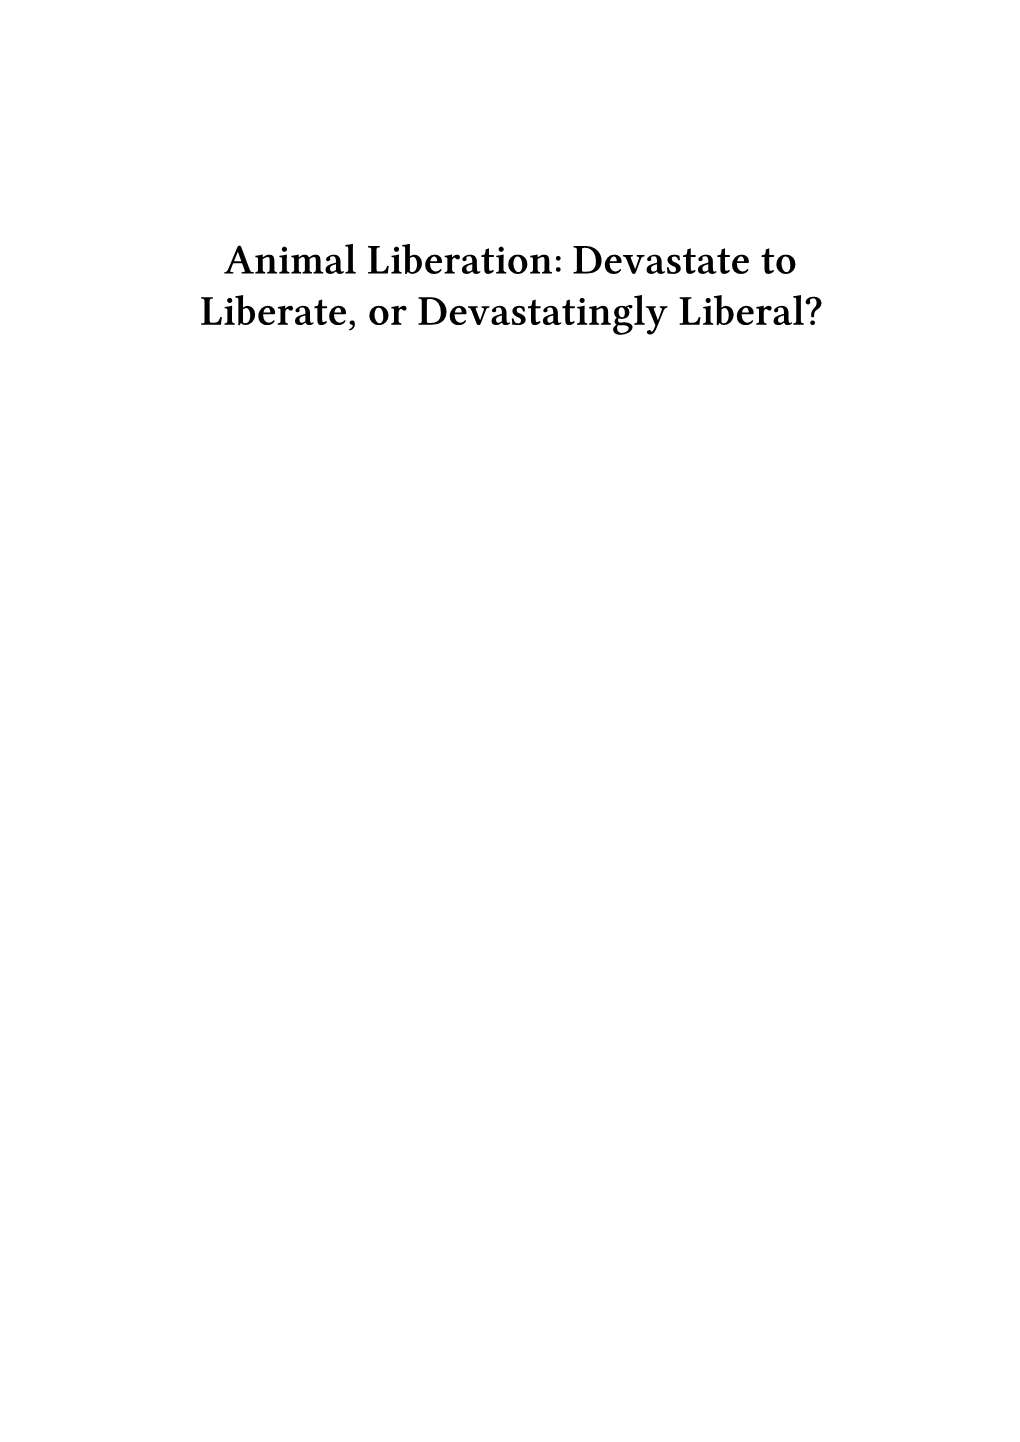 Animal Liberation: Devastate to Liberate, Or Devastatingly Liberal? Contents